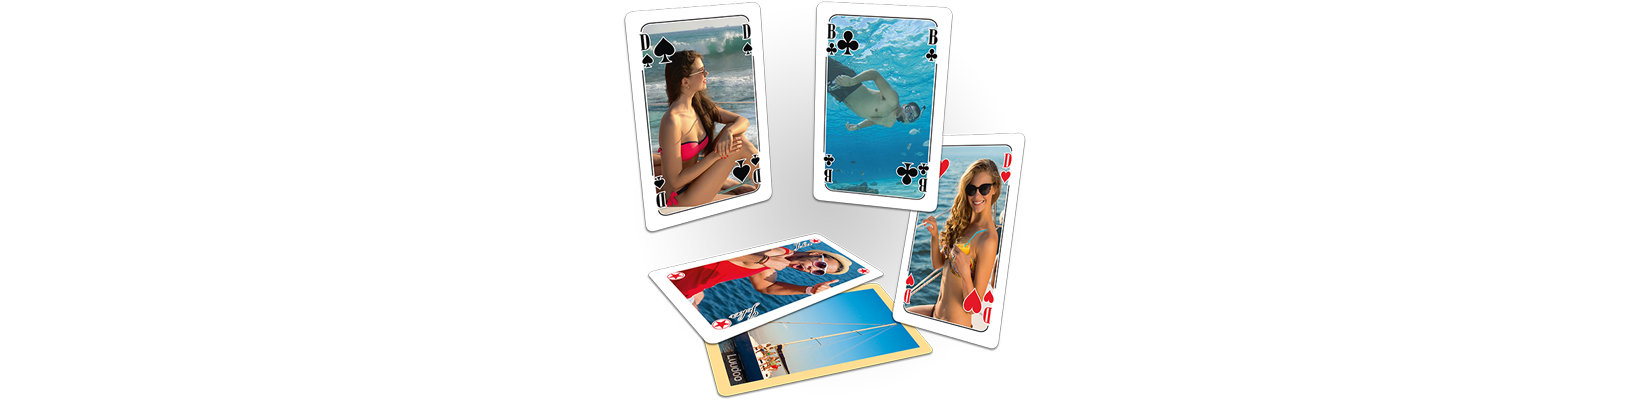 Customise a poker hand by placing your friends on the card faces